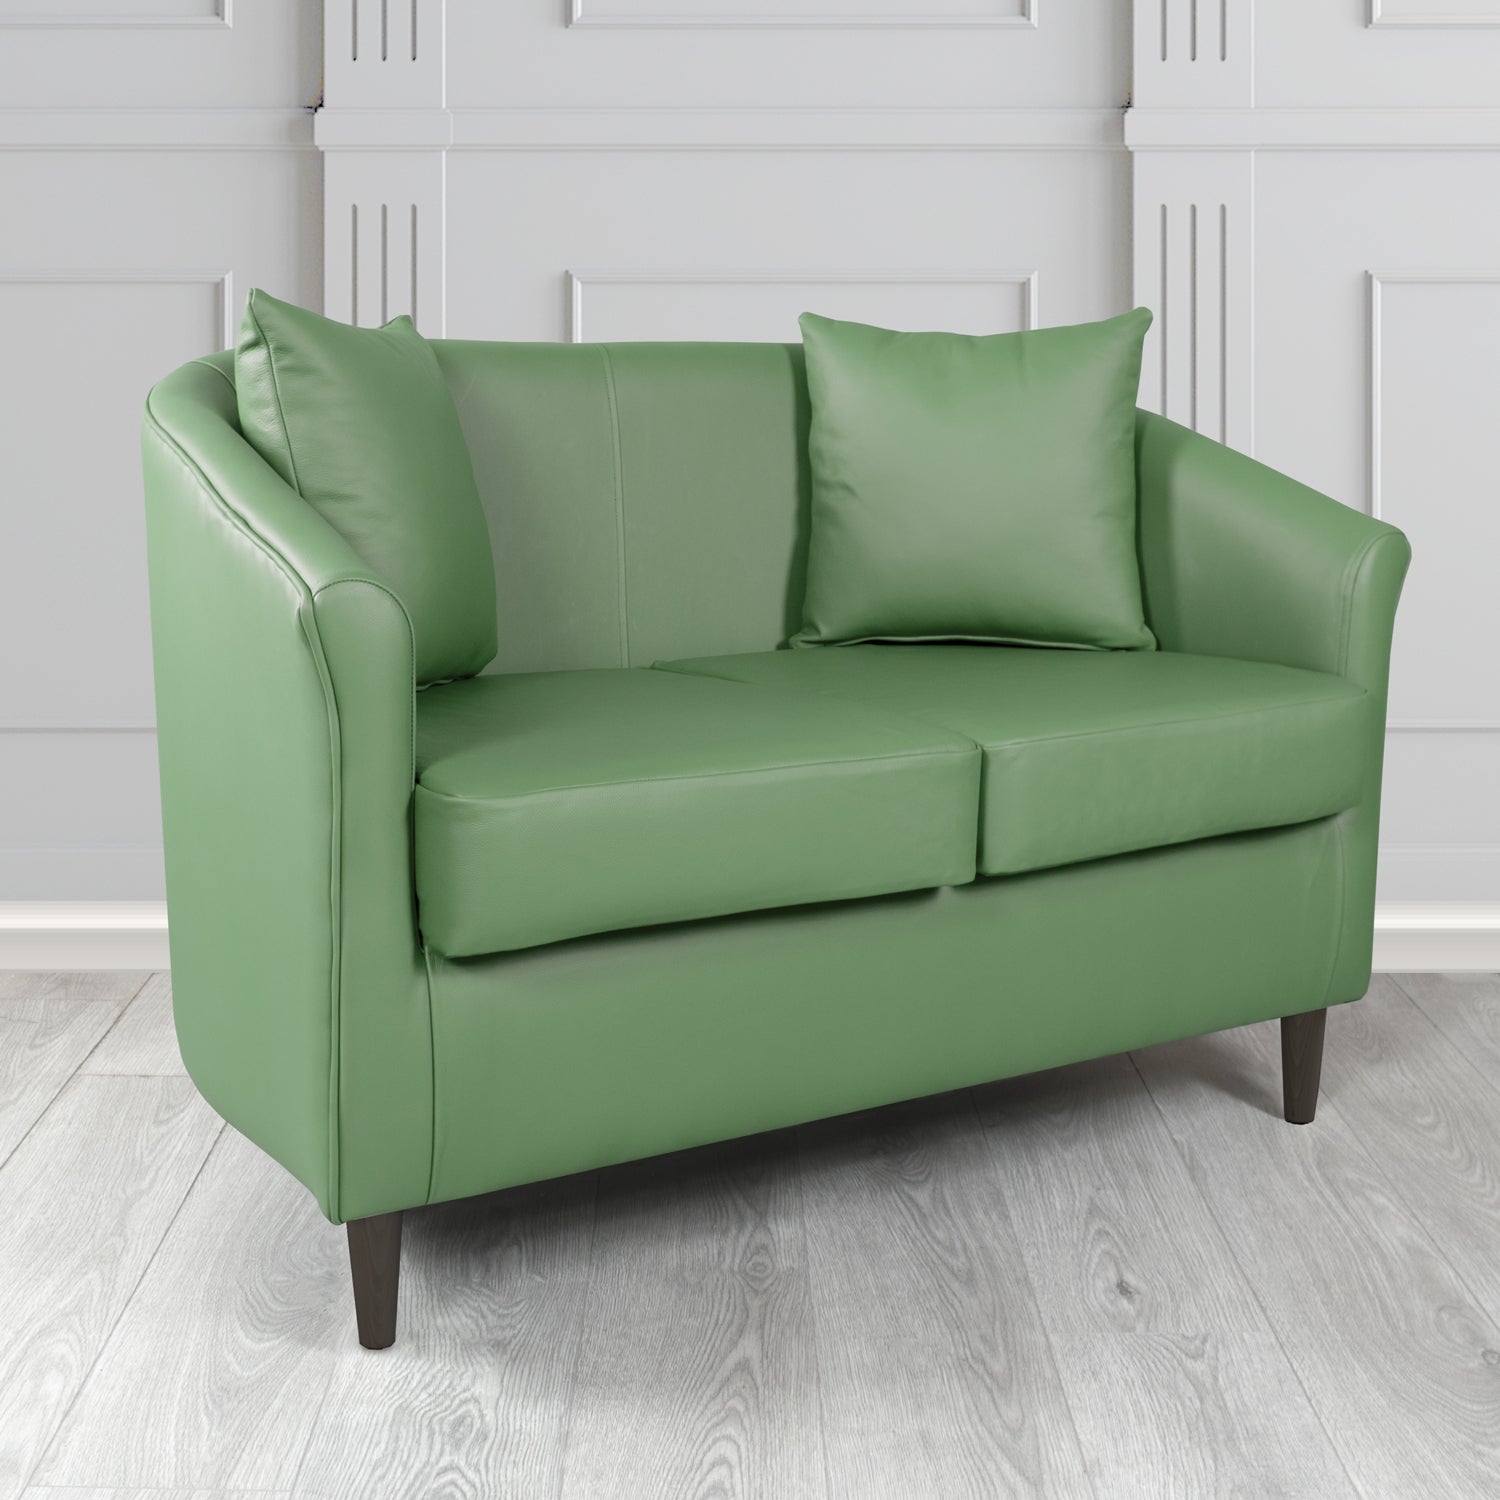 St Tropez Shelly Lichen Crib 5 Genuine Leather 2 Seater Tub Sofa with Scatter Cushions - The Tub Chair Shop